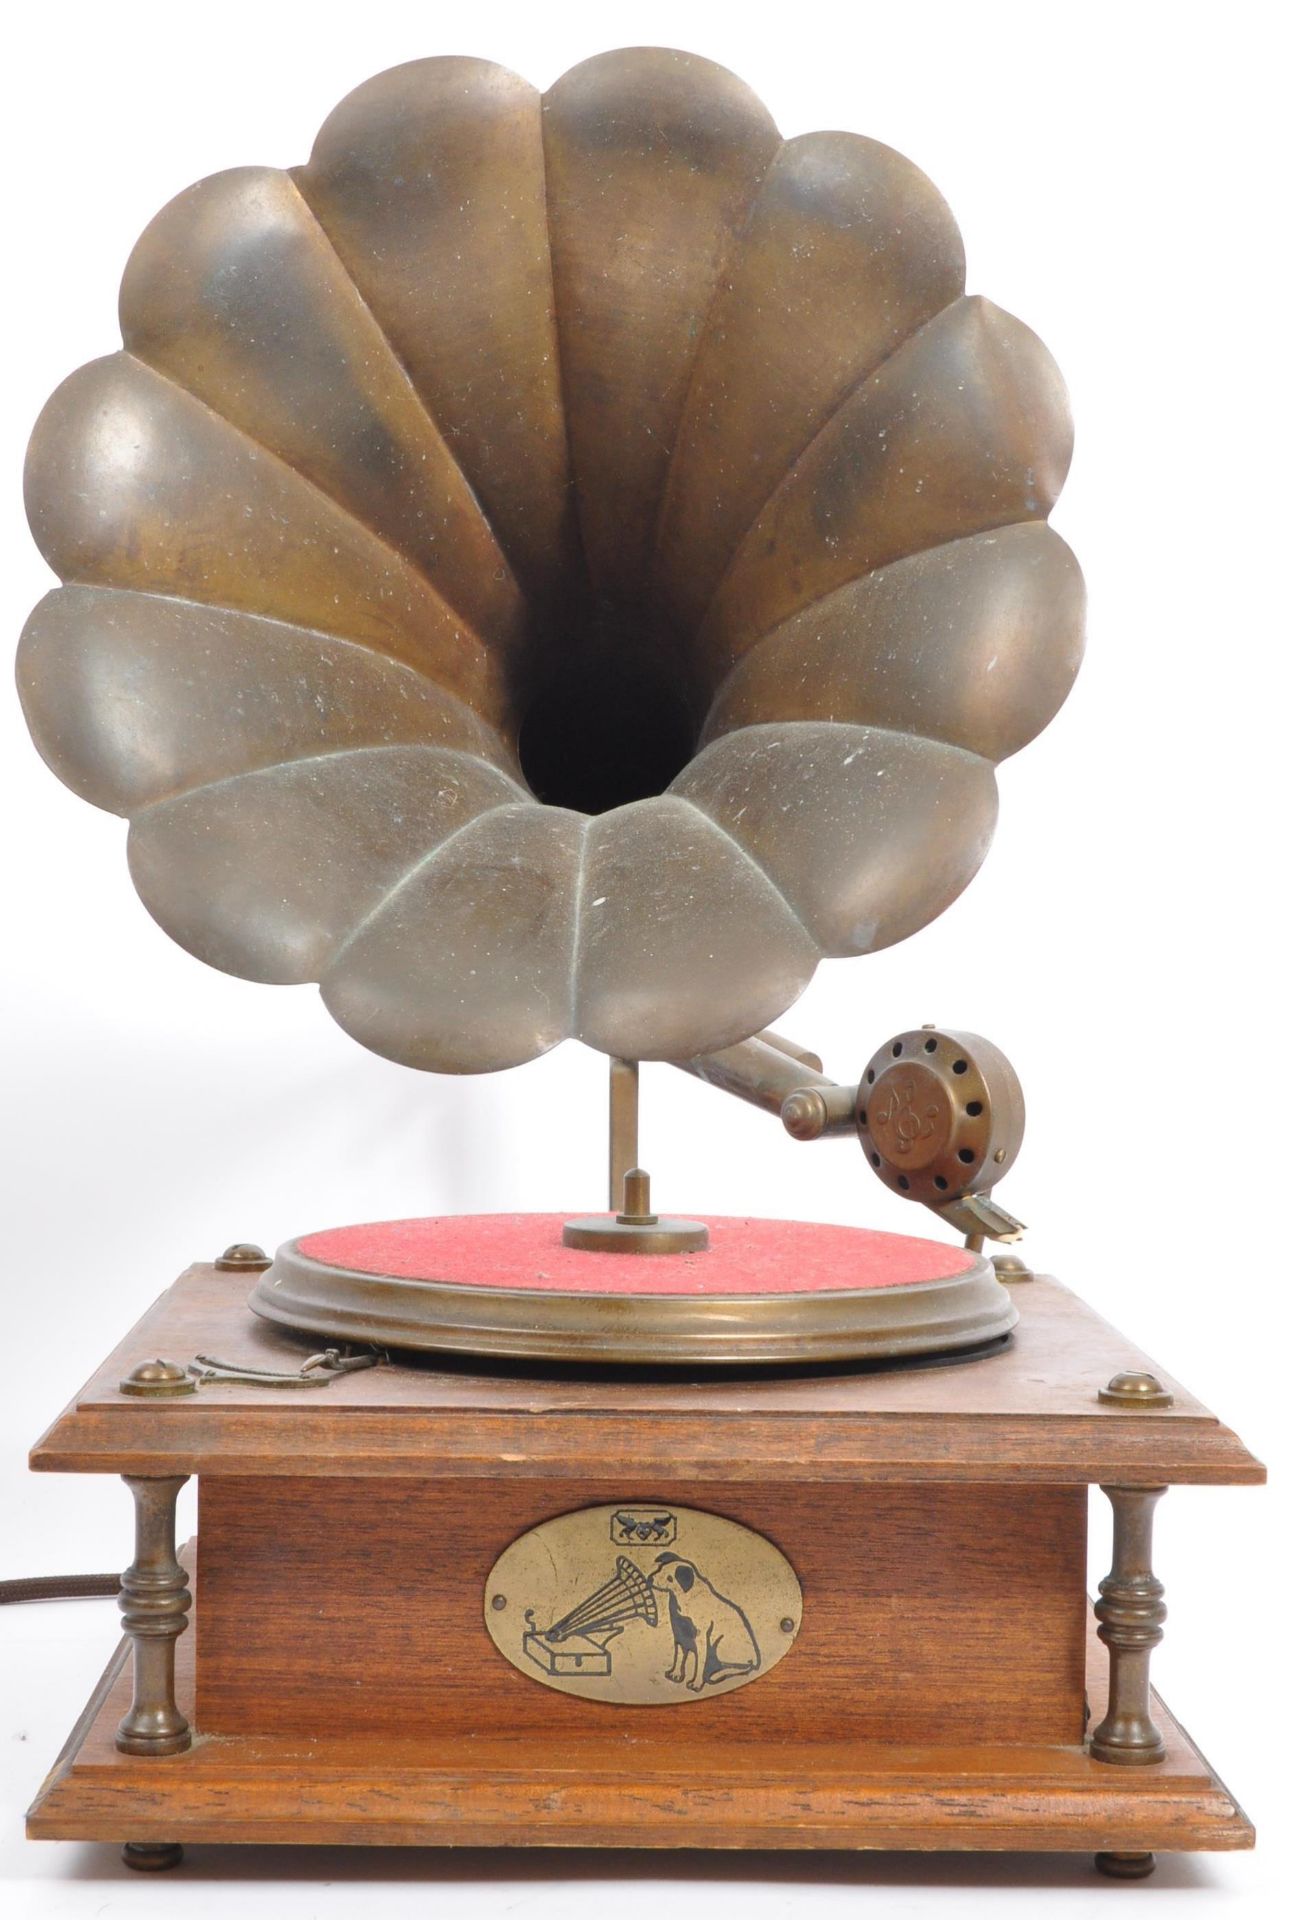 A VINTAGE REPRODUCTION RECORD PLAYER TURNTABLE GRAMOPHONE